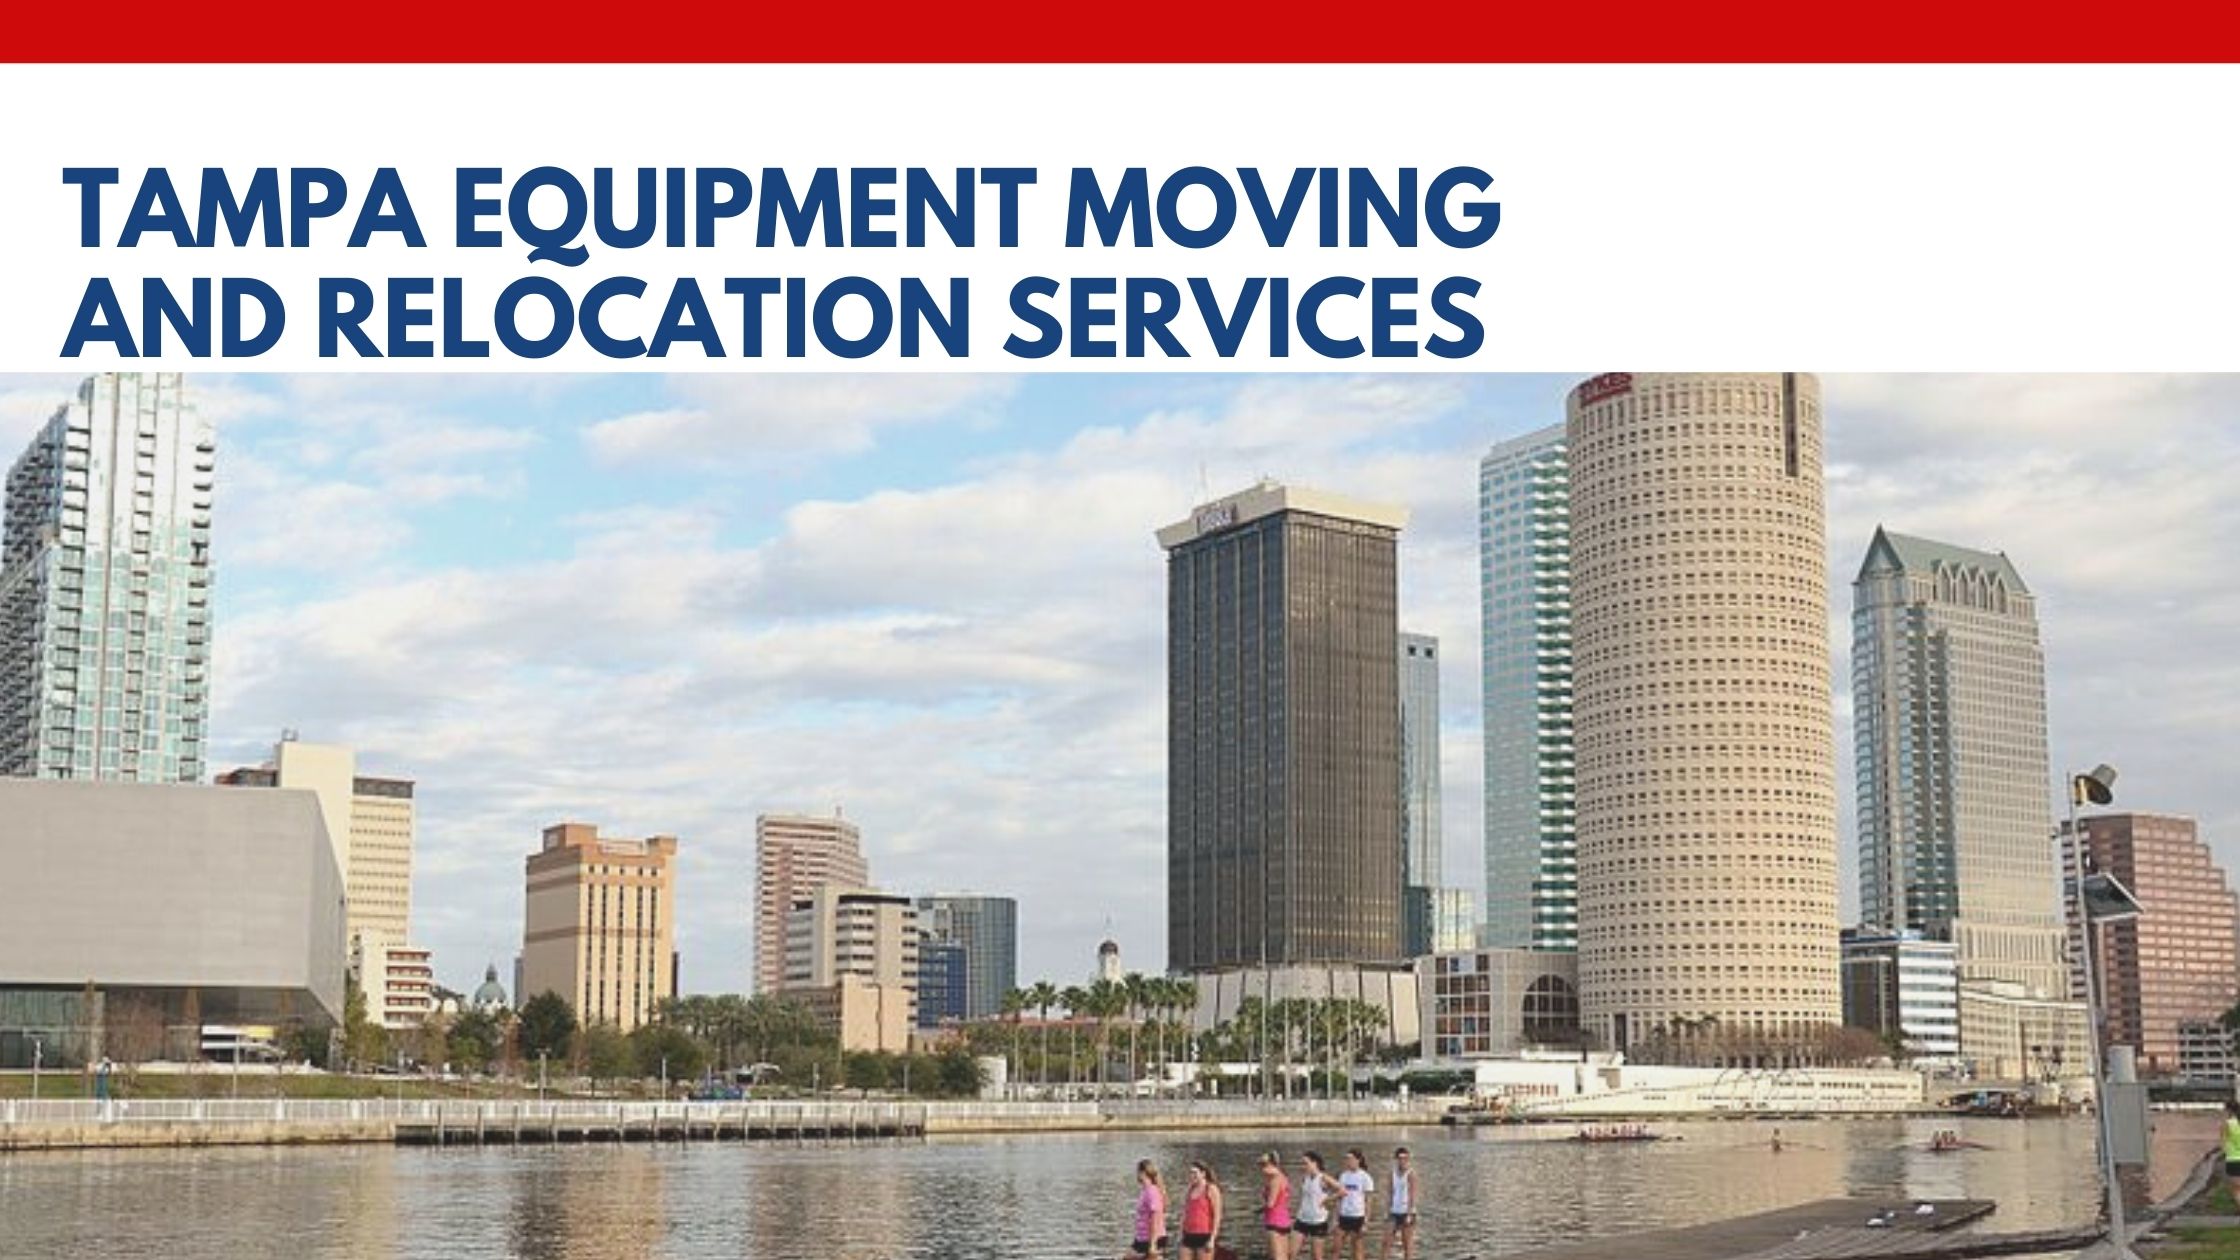 Tampa Equipment Moving and Relocation Services